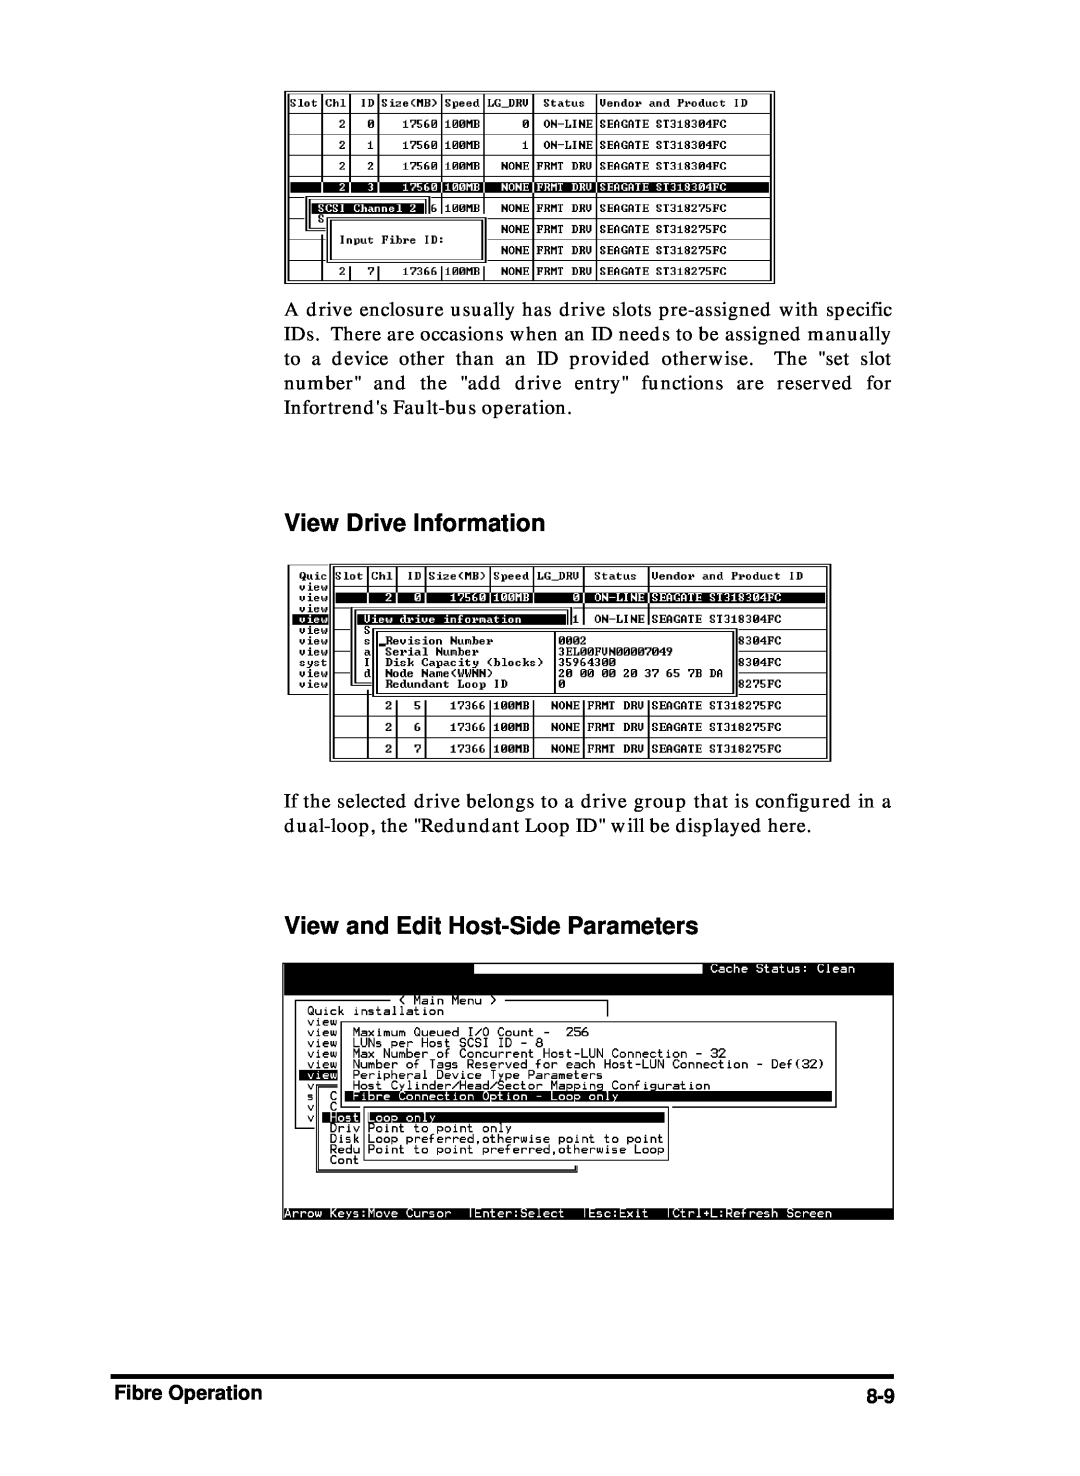 Compaq Infortrend manual View and Edit Host-Side Parameters, View Drive Information 